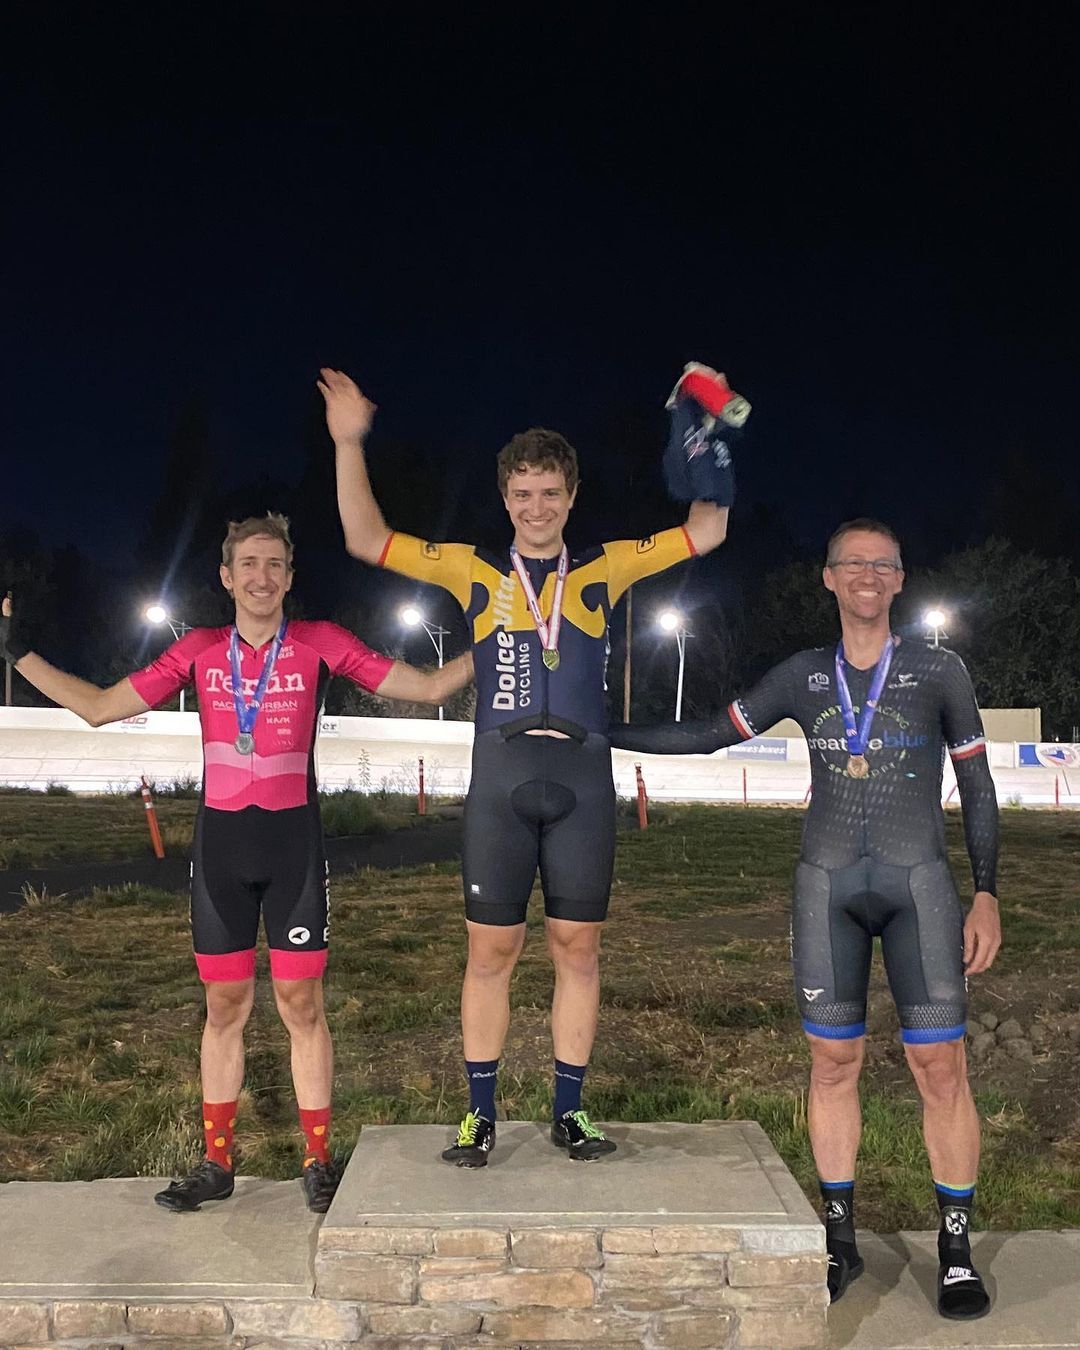 District Champ! Another big win for Stephen Doll on the track! Stephen nabbed 🥇in a super-fast district championship race in the Keirin last night. He also brought home 🥉in the district championship for the Madison. Congrats Stephen! 

@sportful @sfitalianathleticclub @equatorcoffees @poggio_labs @achieveptc @tripsforkidsmarin @sage.realestategroup @marinservicecourse @jkbrkb #themenkegeoup #onewealthadvisors